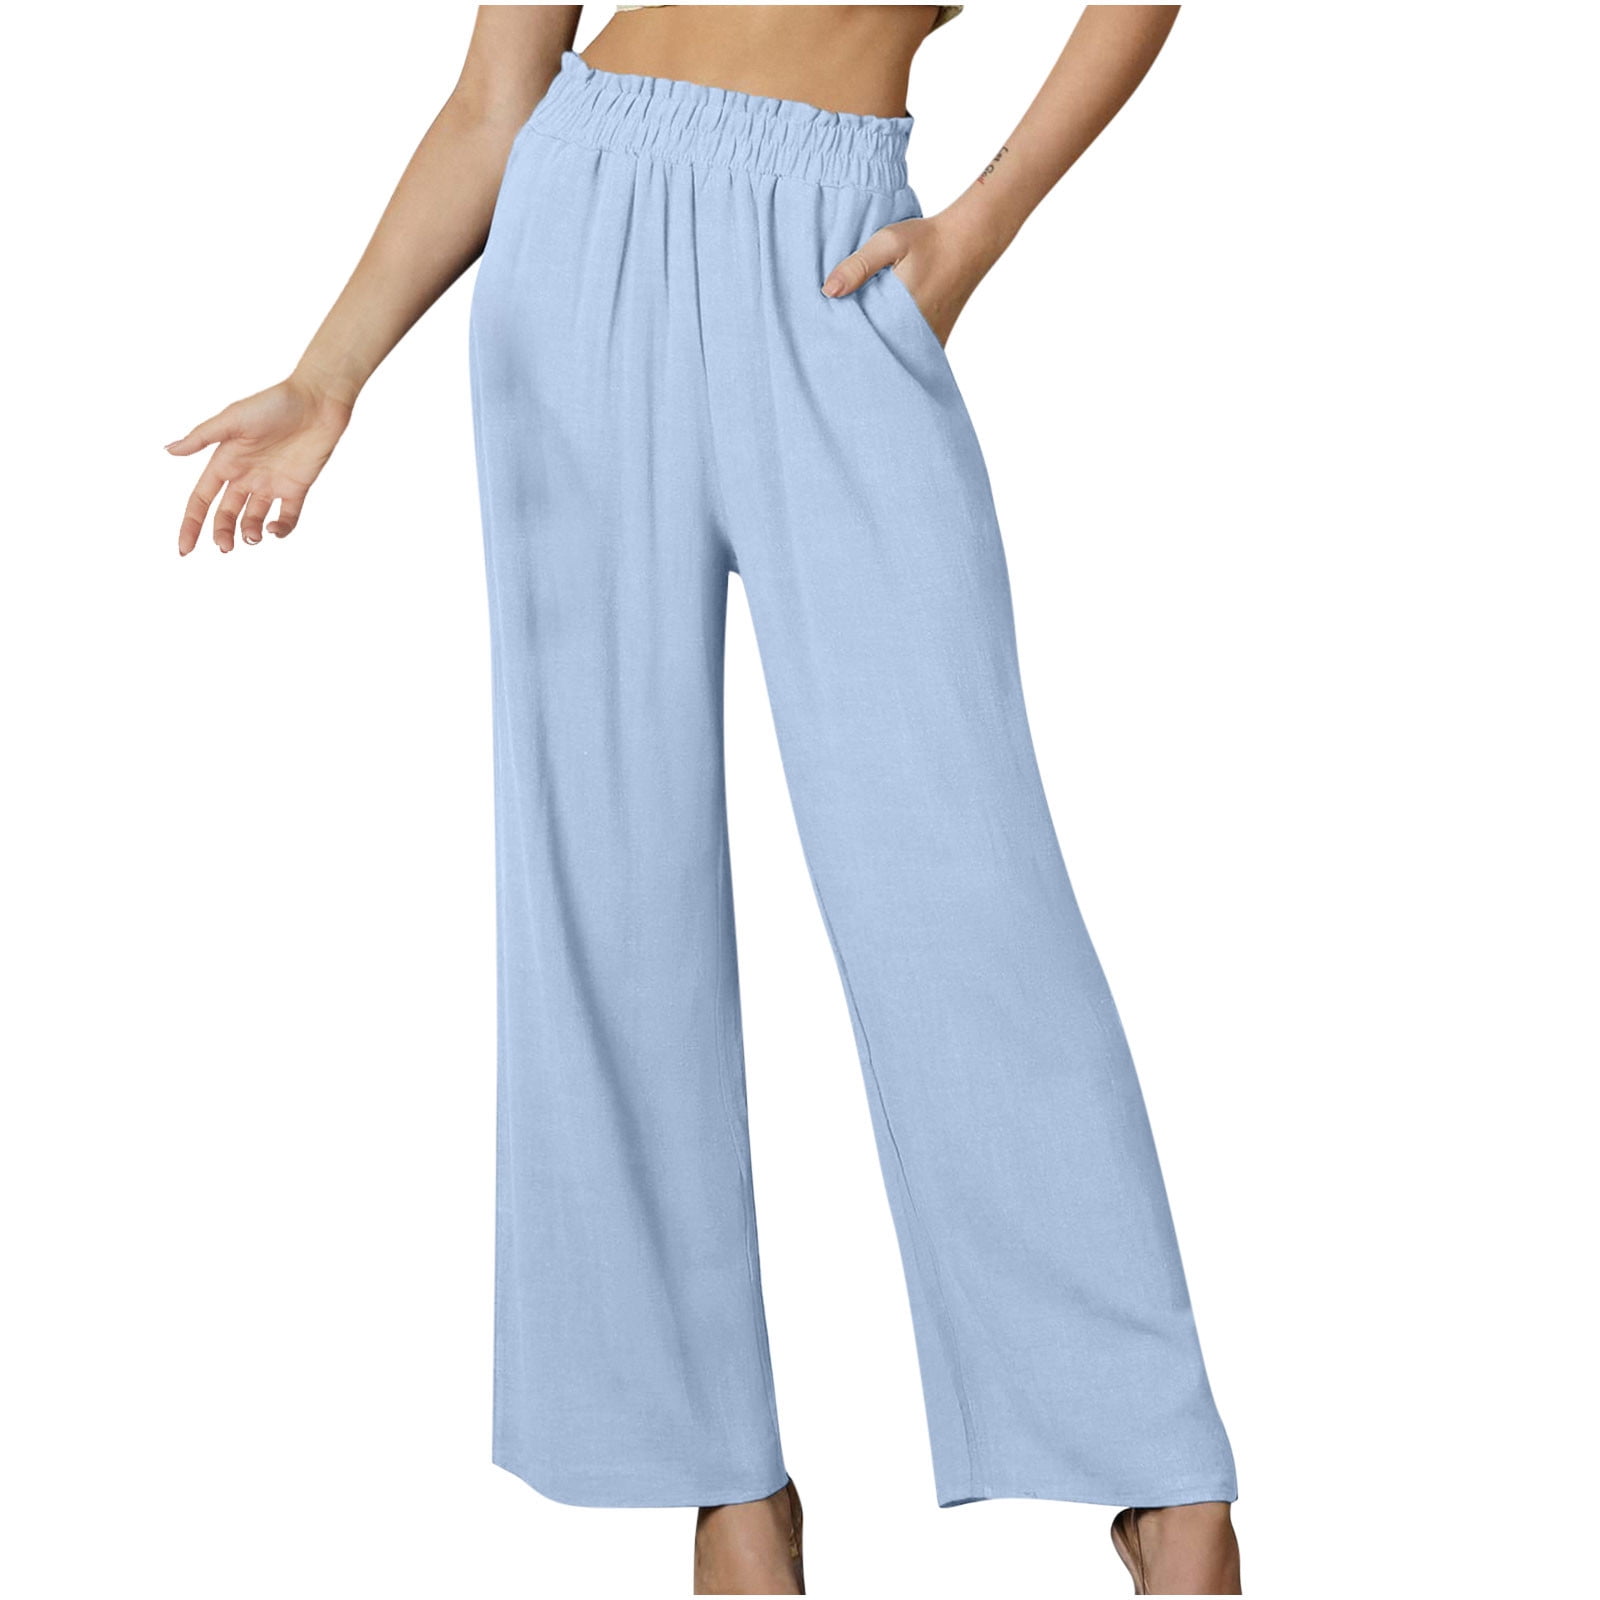 Bigersell Solid Blue Pant for Women Full Length Pants Fashion